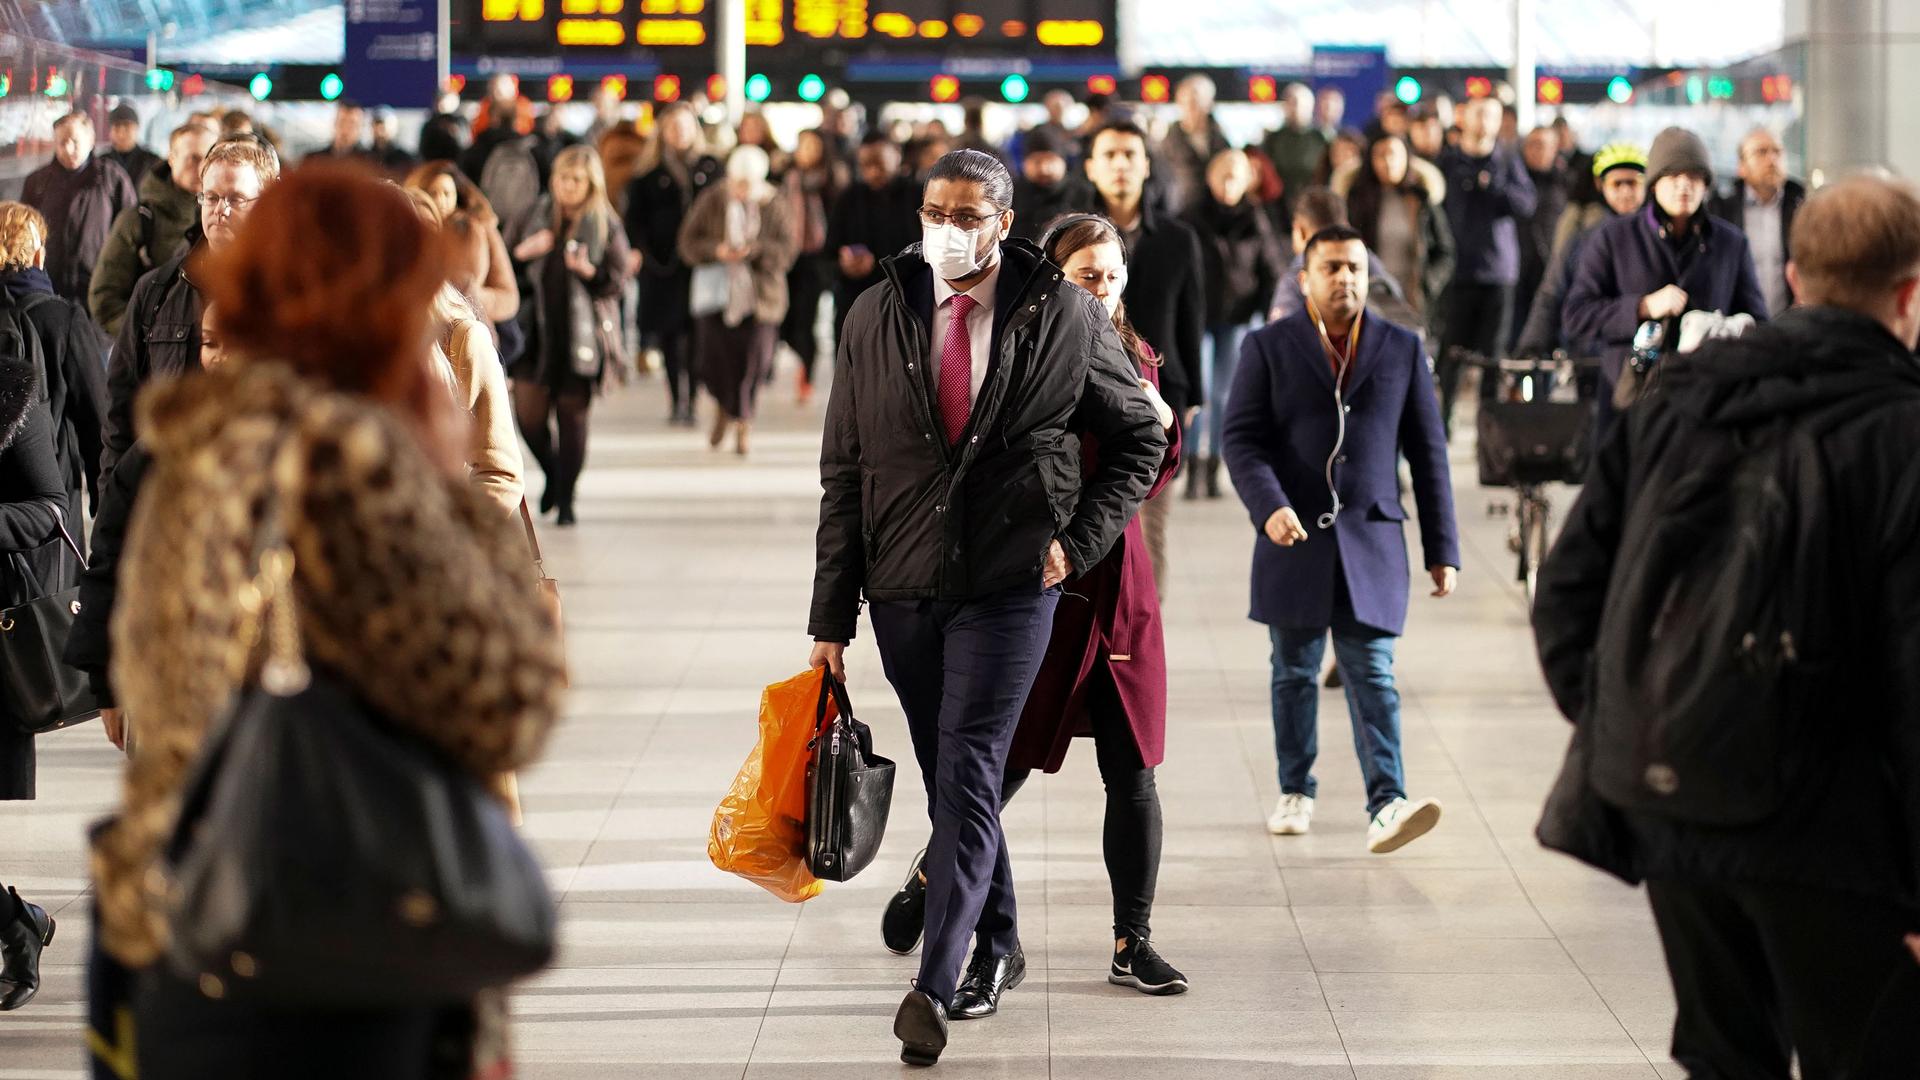 A large crowd of people are seen at Waterloo station with a man in the center of the frame wearing a face mask.